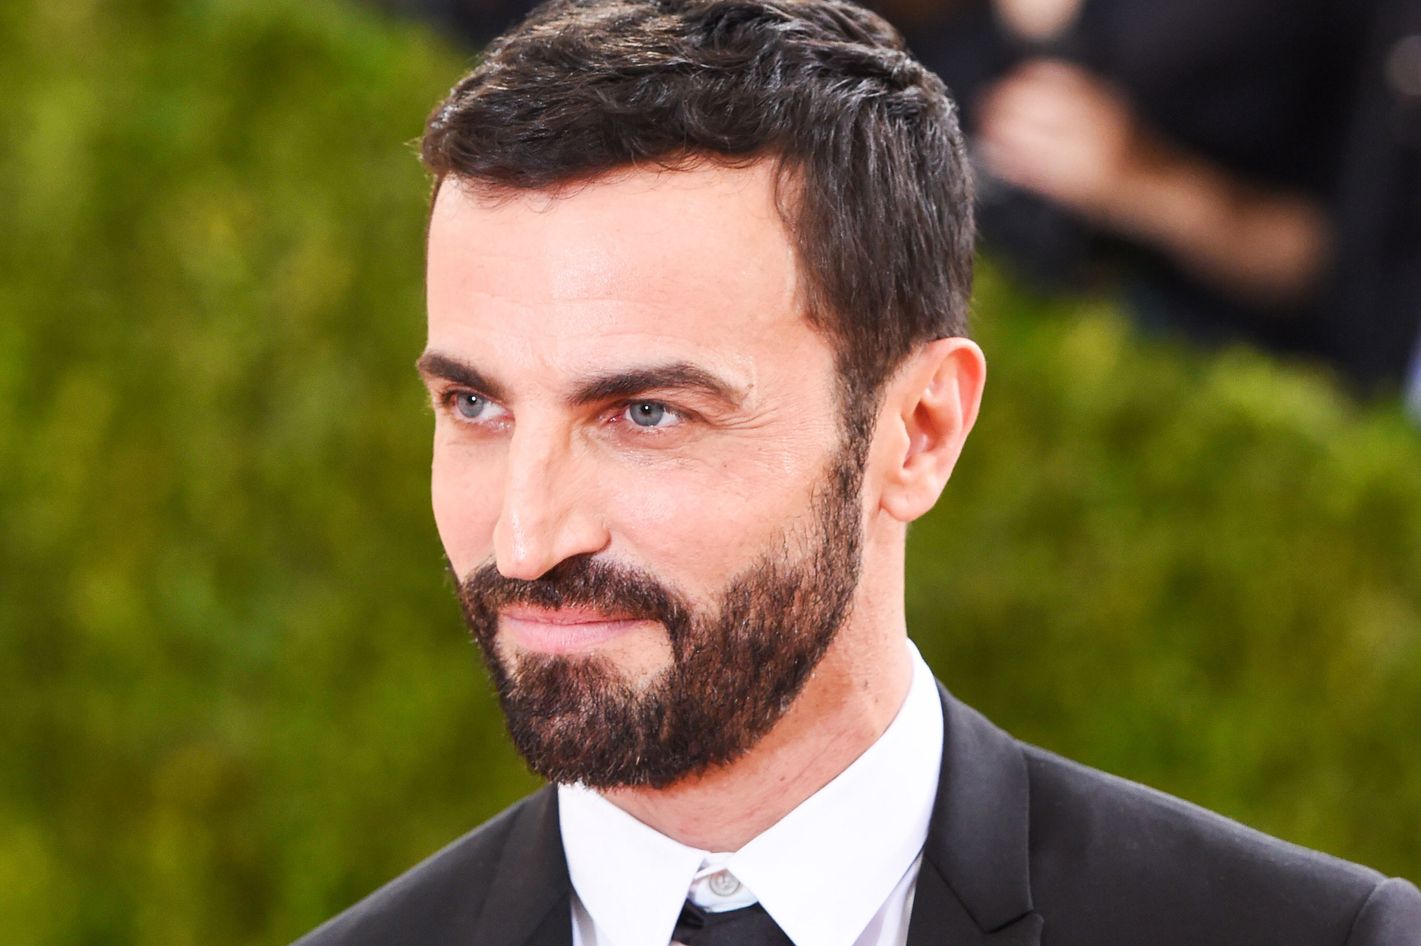 Report: Nicolas Ghesquière May Be Leaving Louis Vuitton [UPDATED]